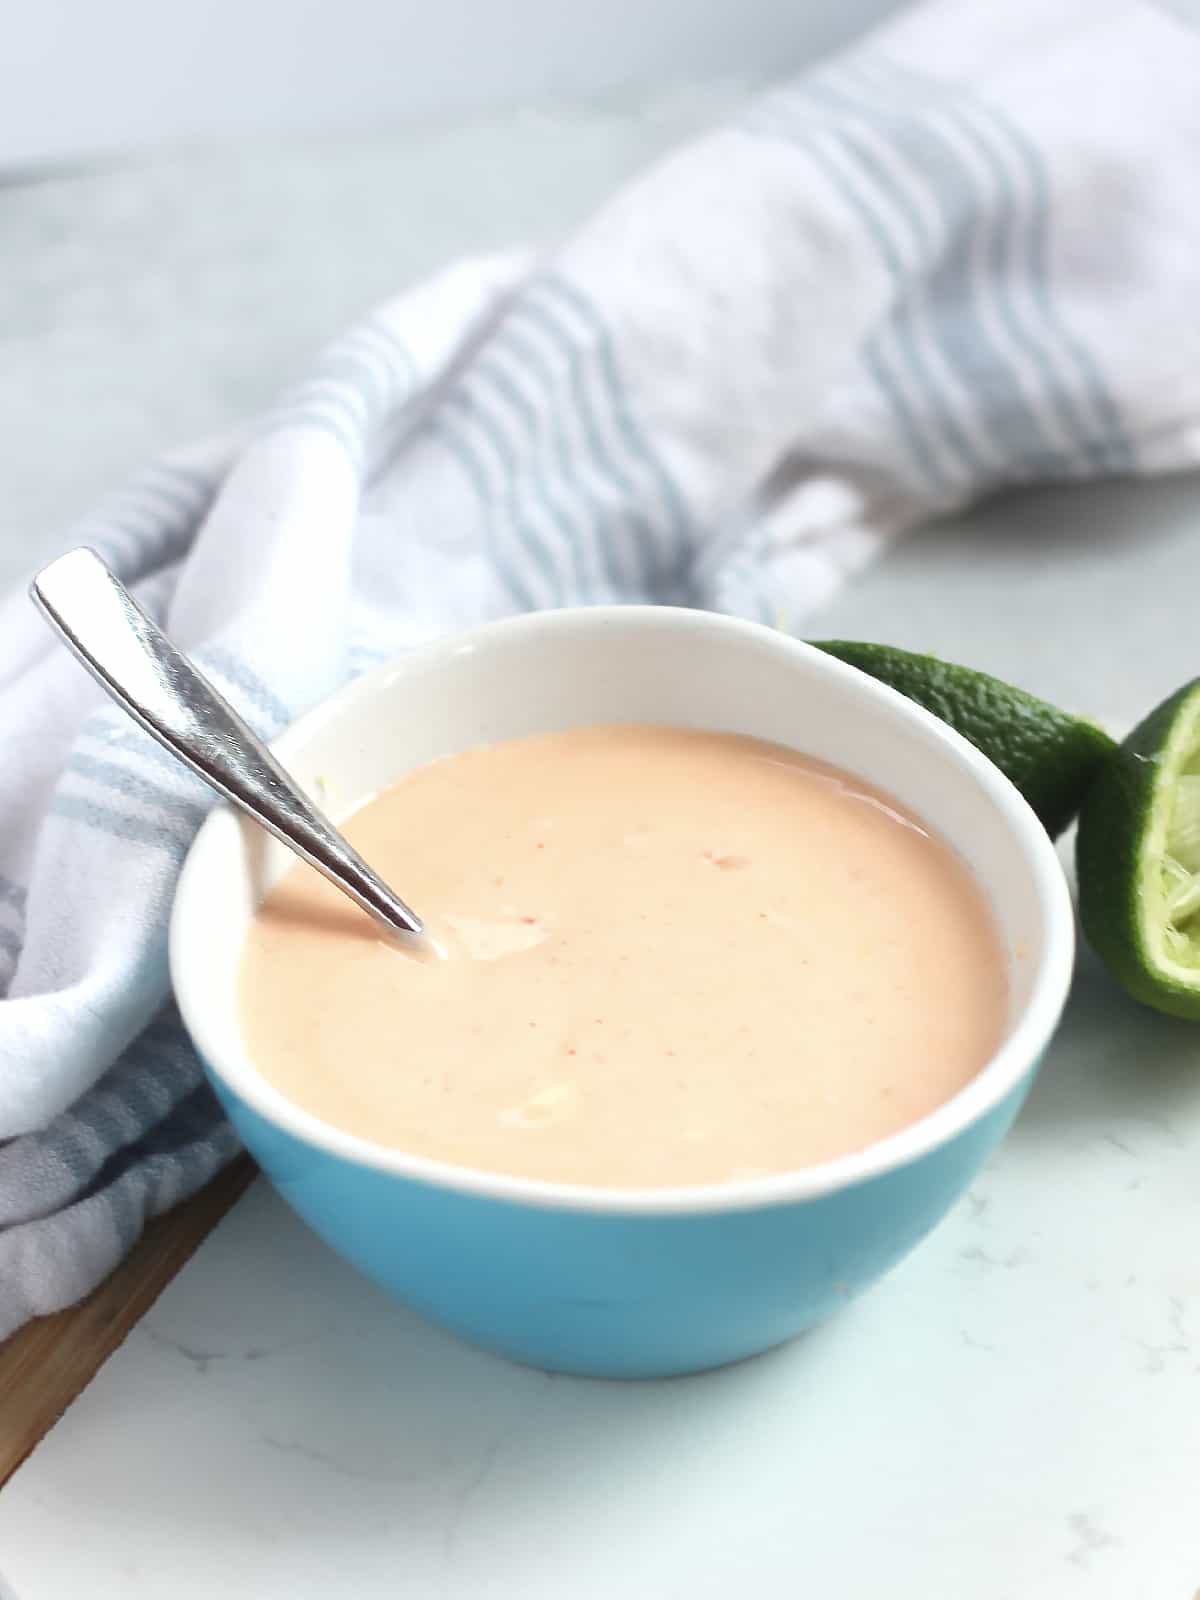 Creamy Thai dipping sauce in a blue bowl next to a fresh lime.